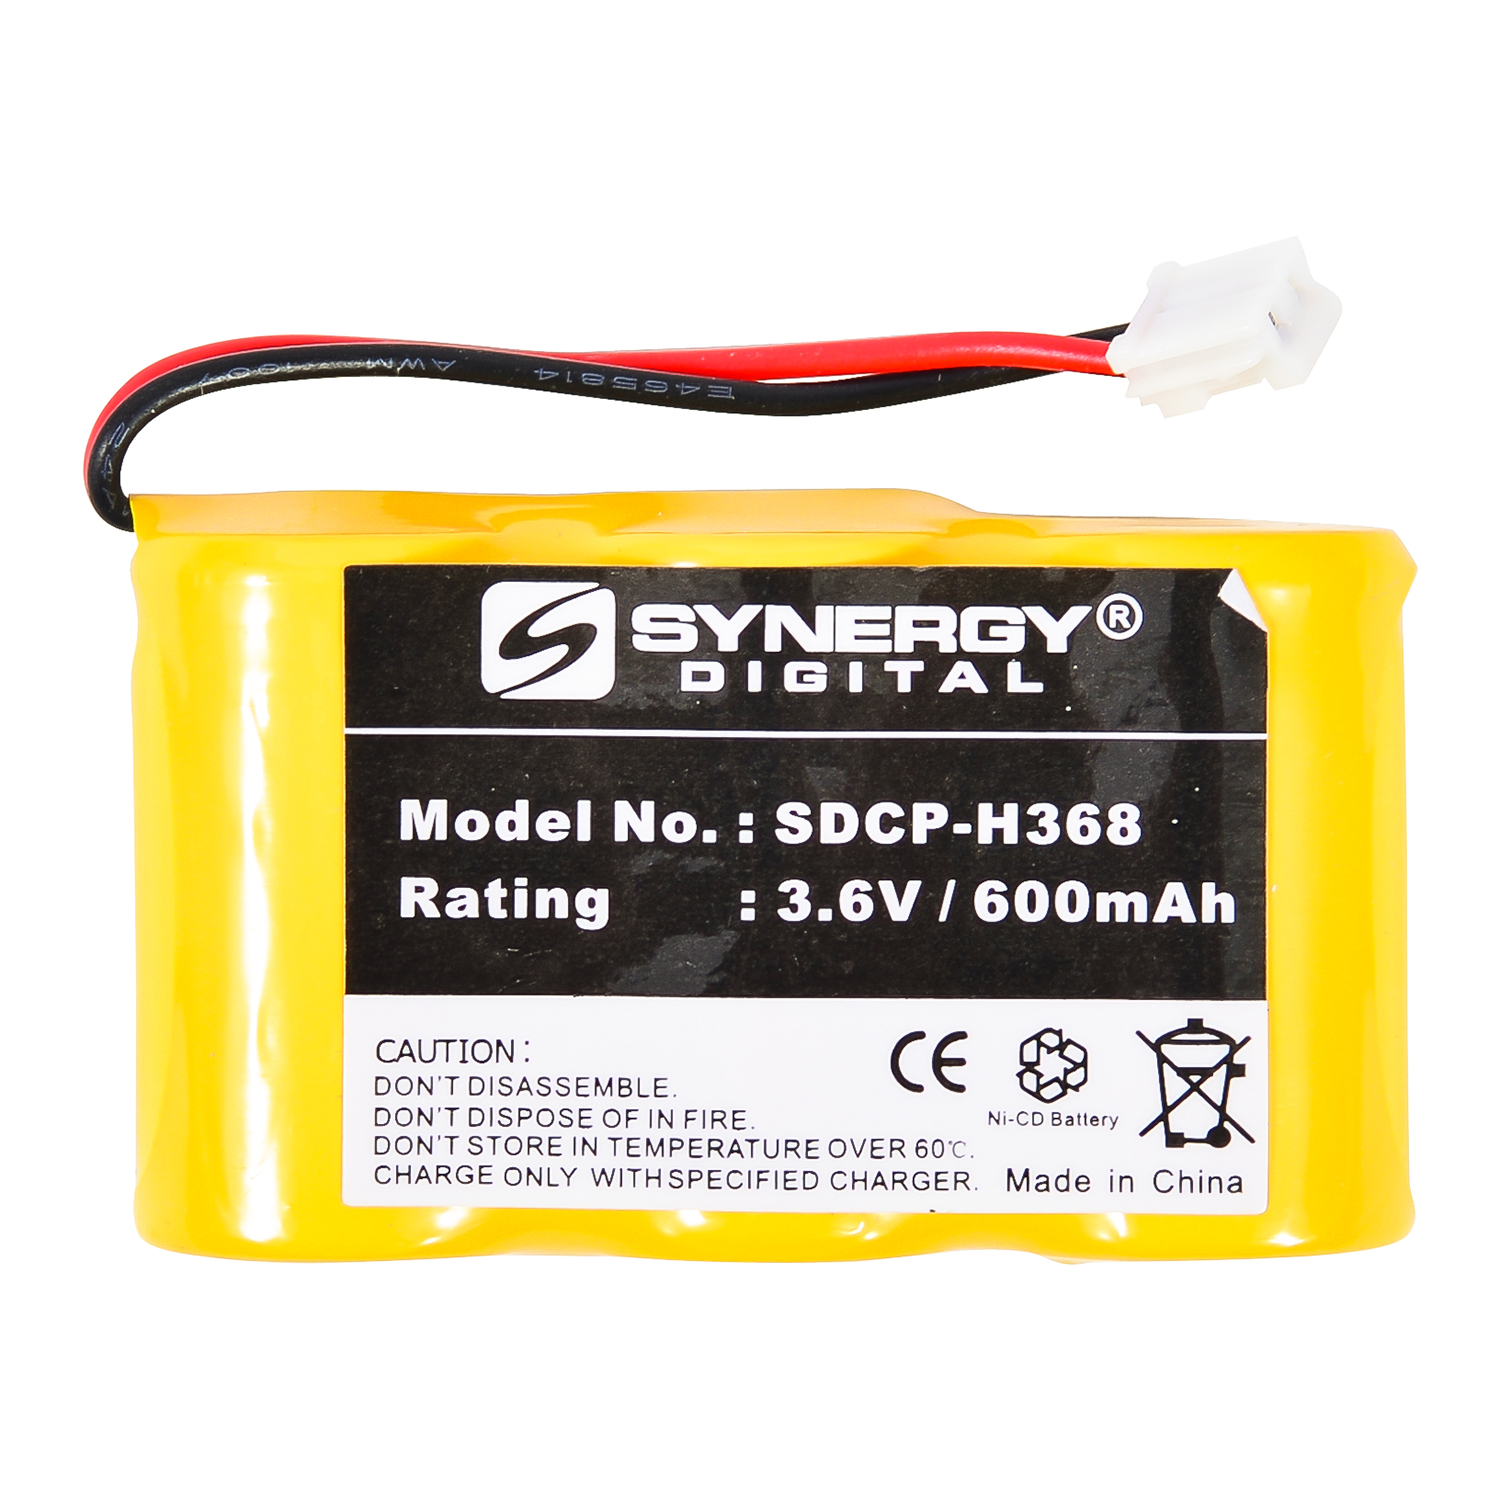 Batteries for RCACordless Phone